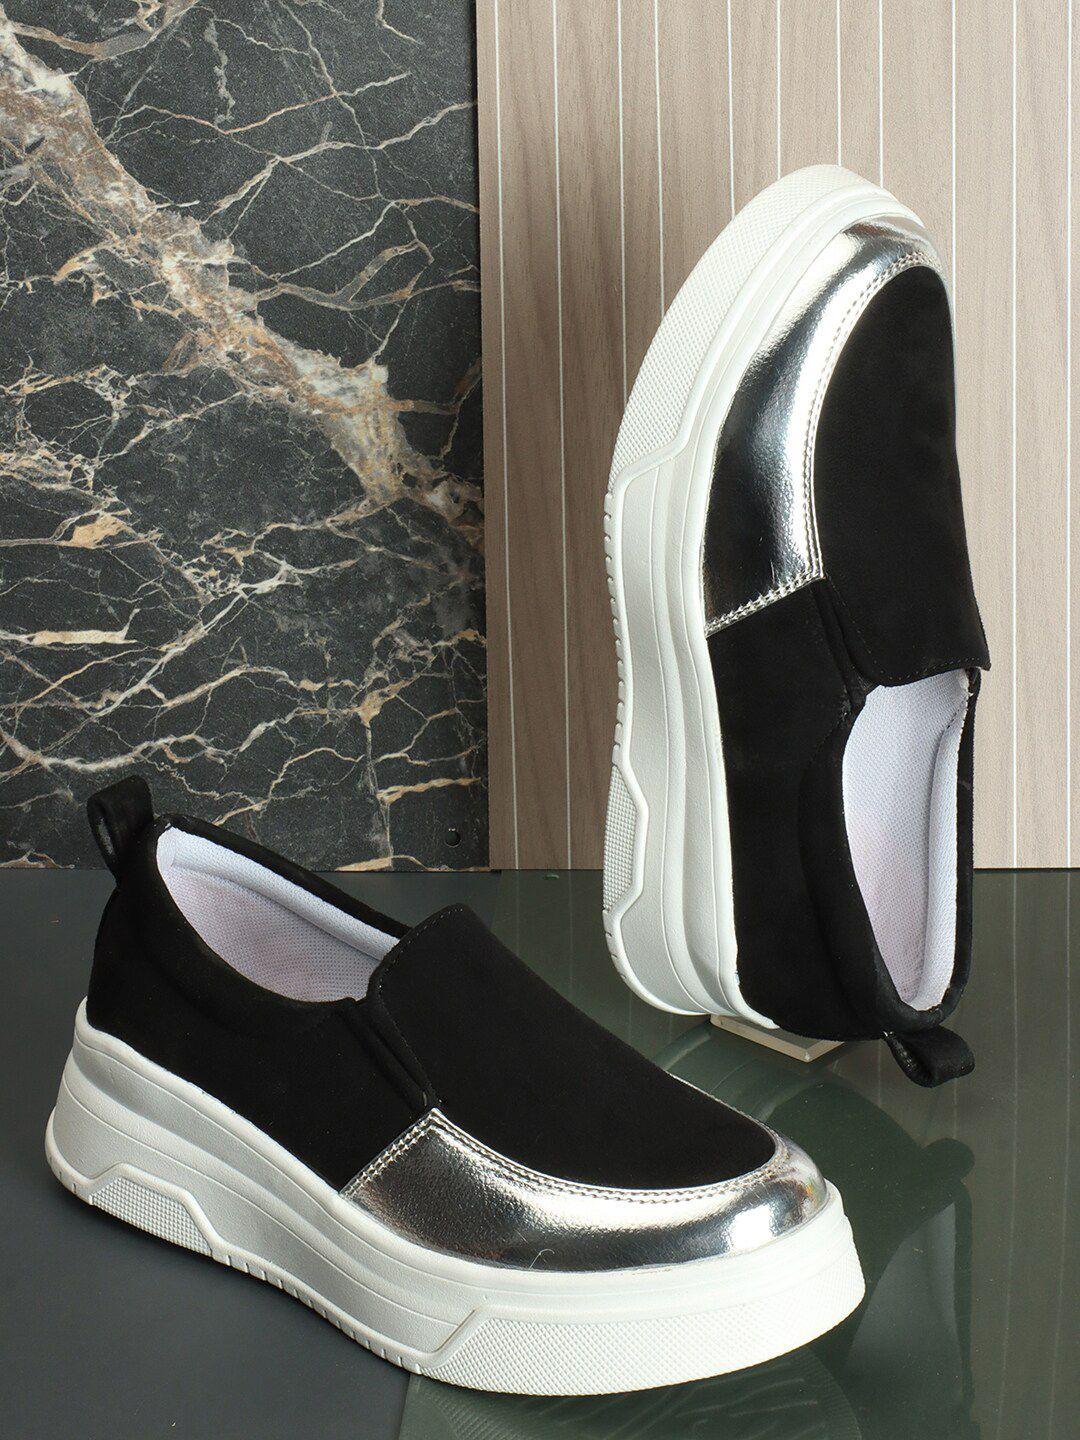 the roadster lifestyle co. women colourblocked slip-on sneakers